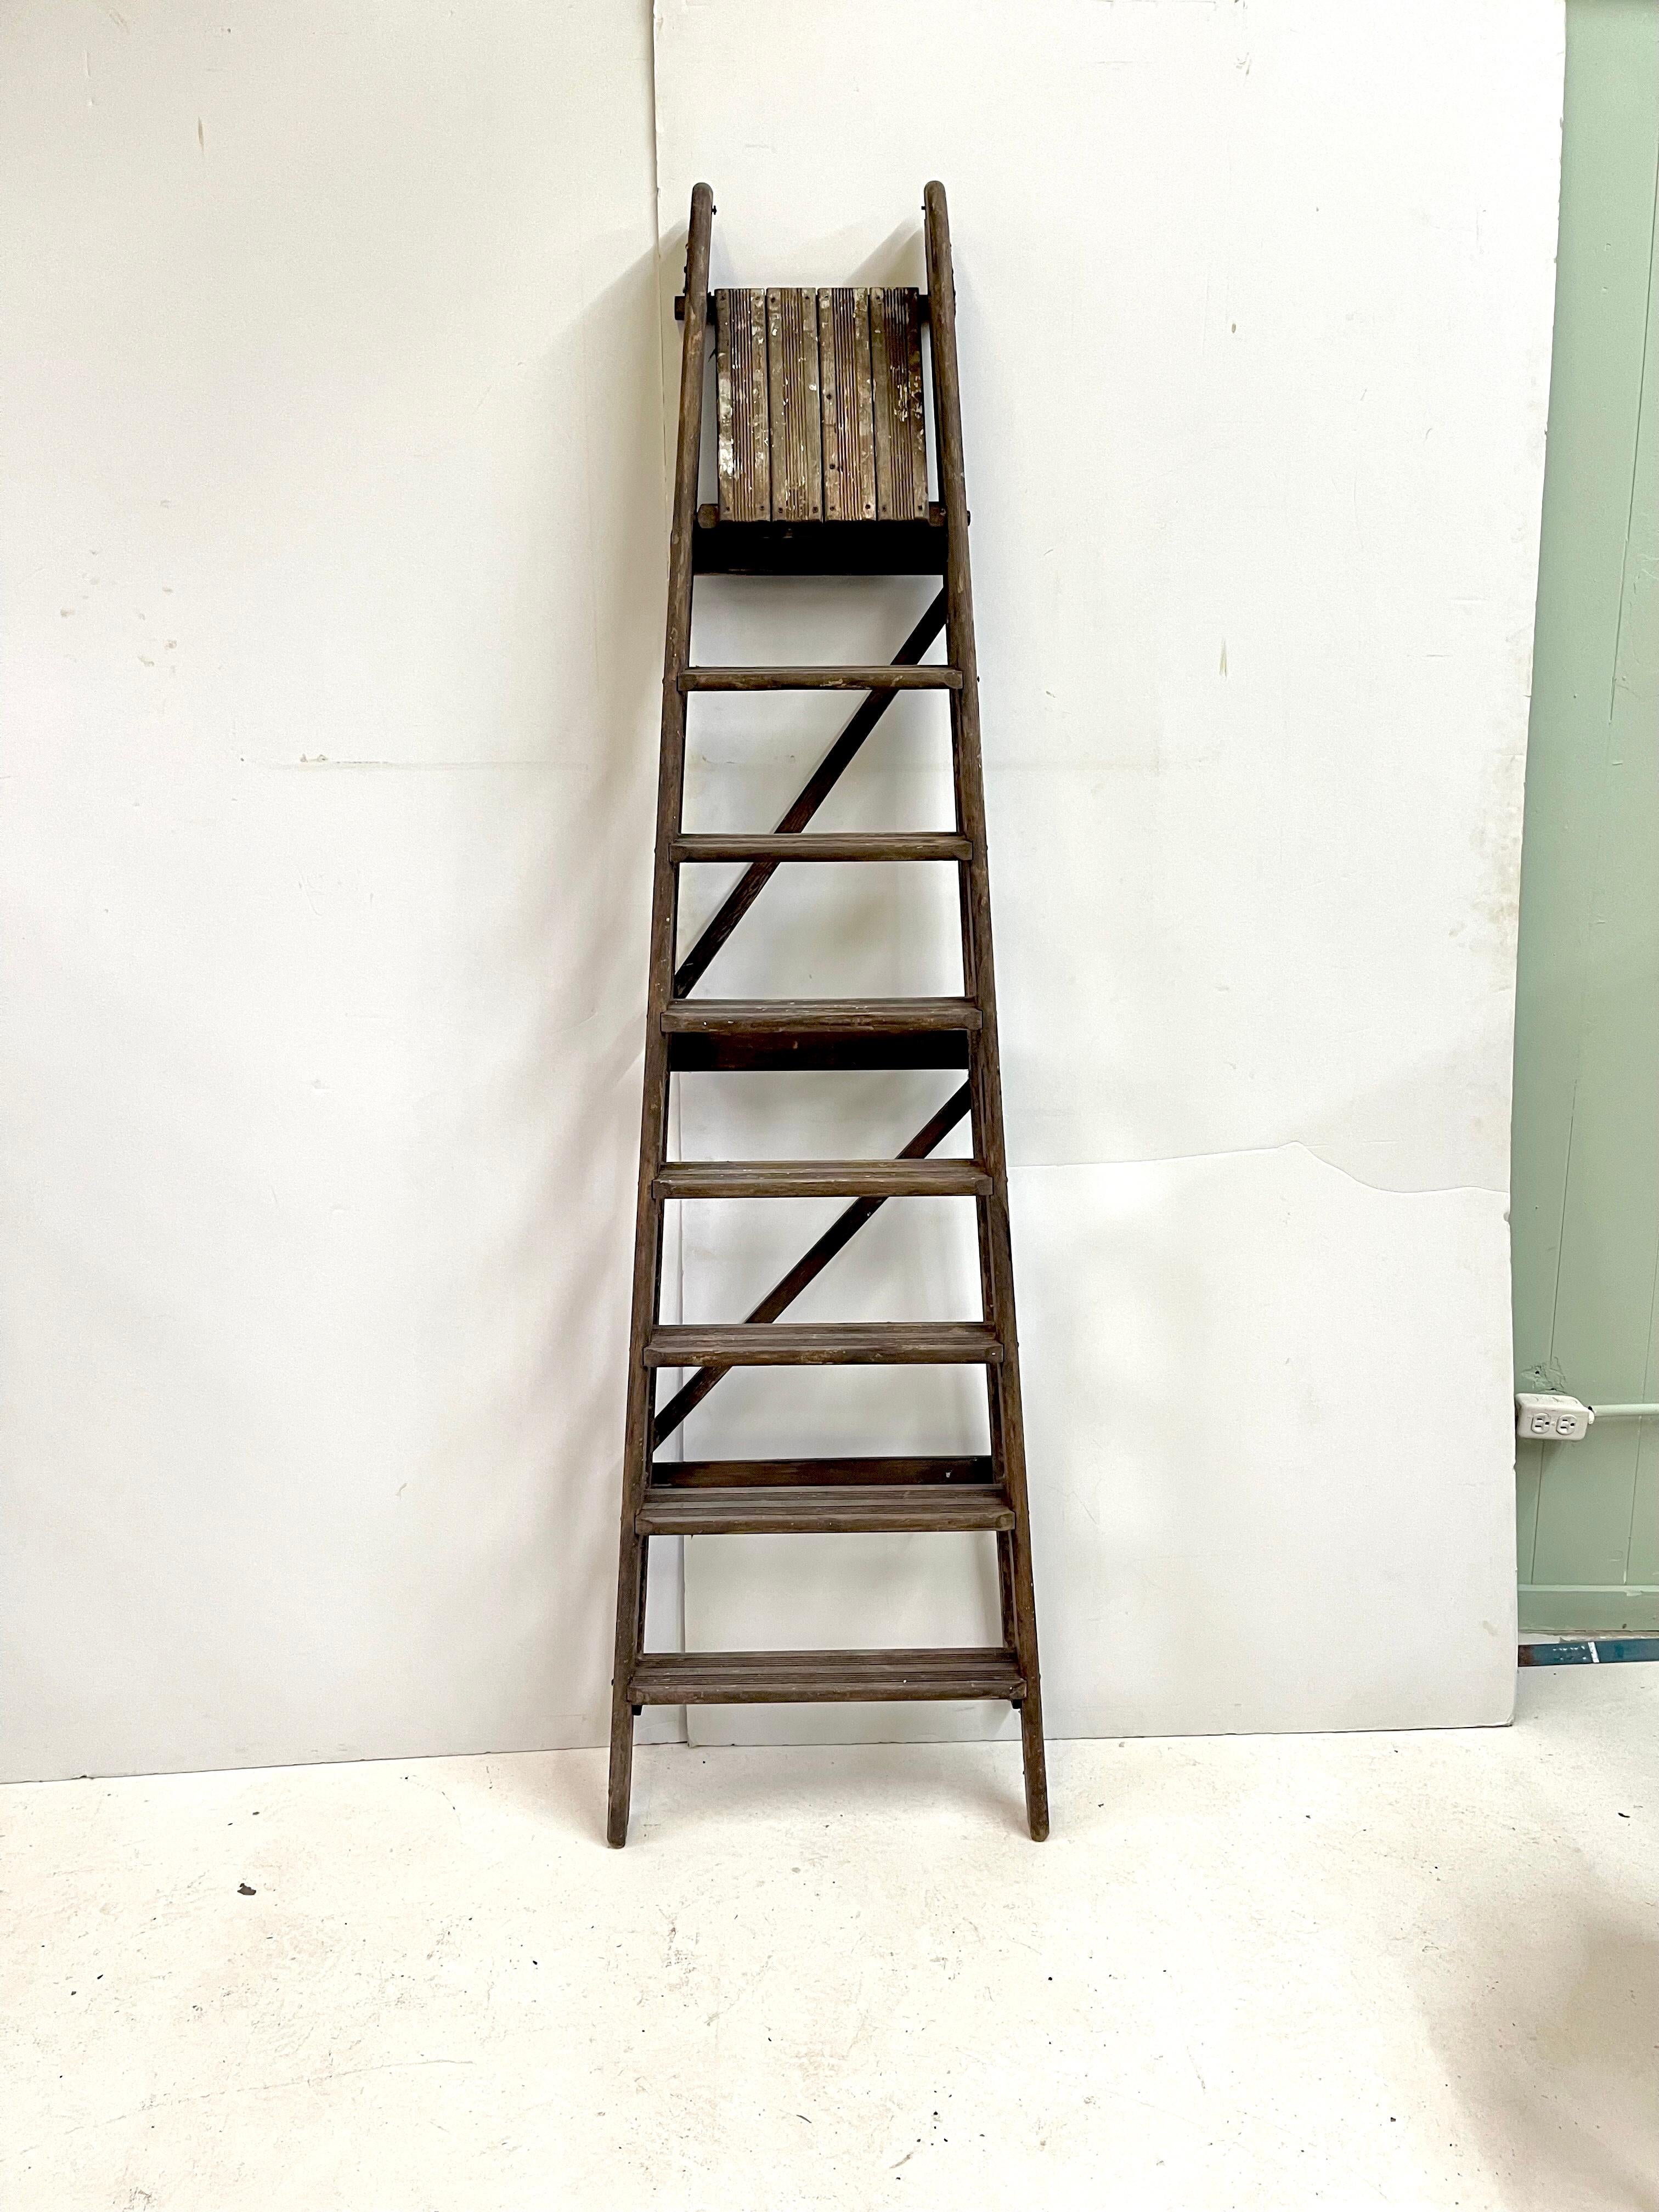 English Antique Wooden Folding Ladder with Tray Shelf For Sale 2